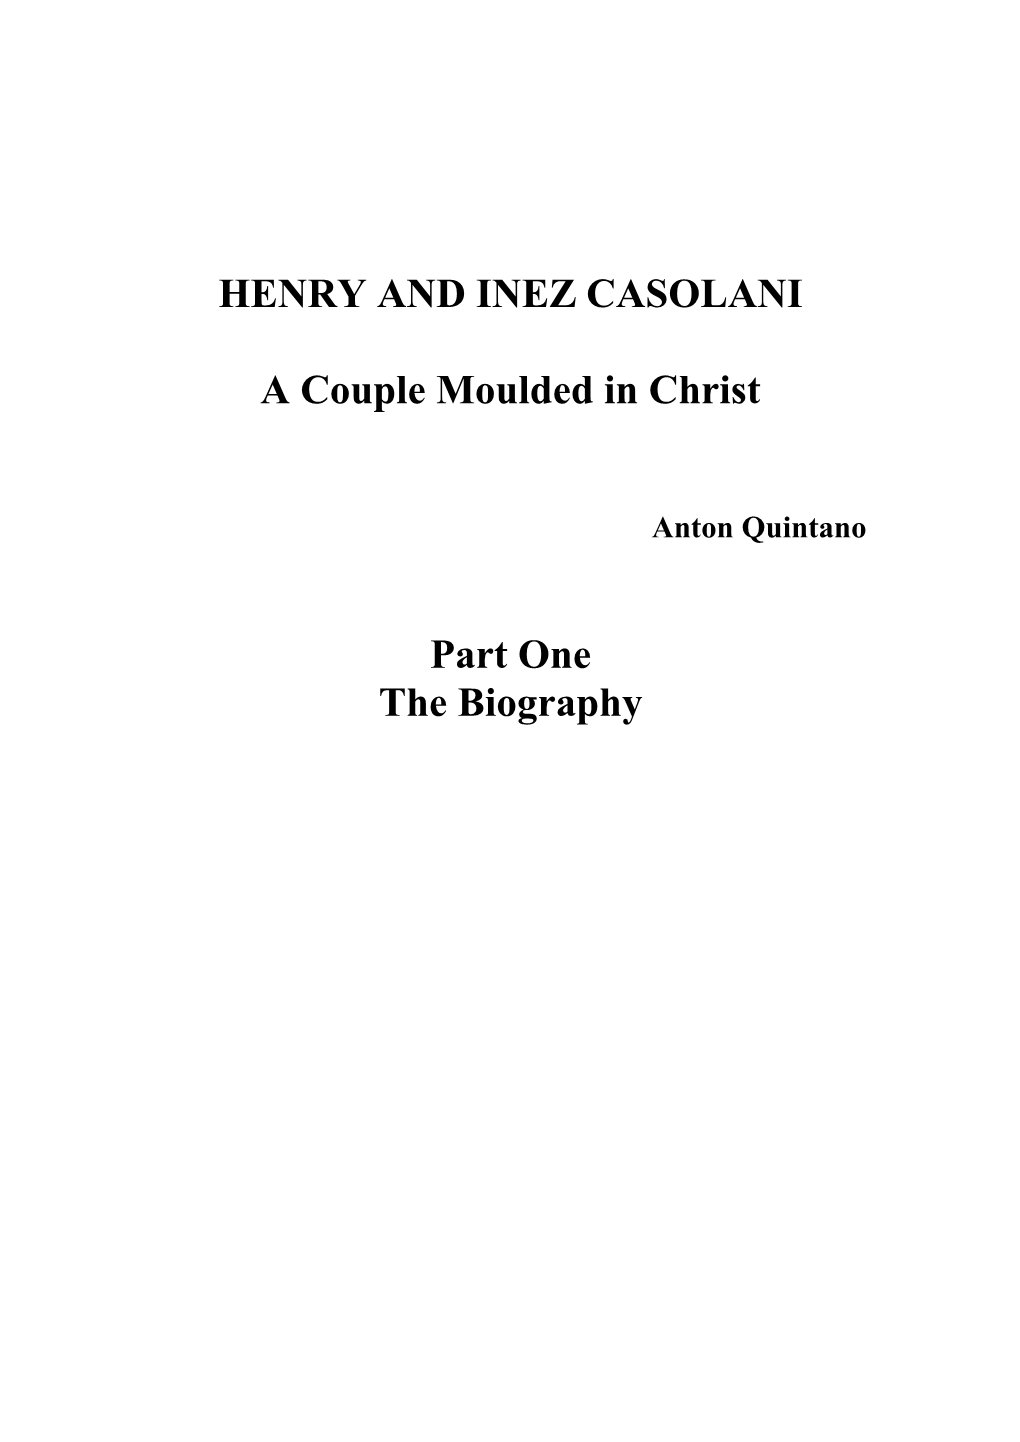 HENRY and INEZ CASOLANI a Couple Moulded in Christ Part One the Biography